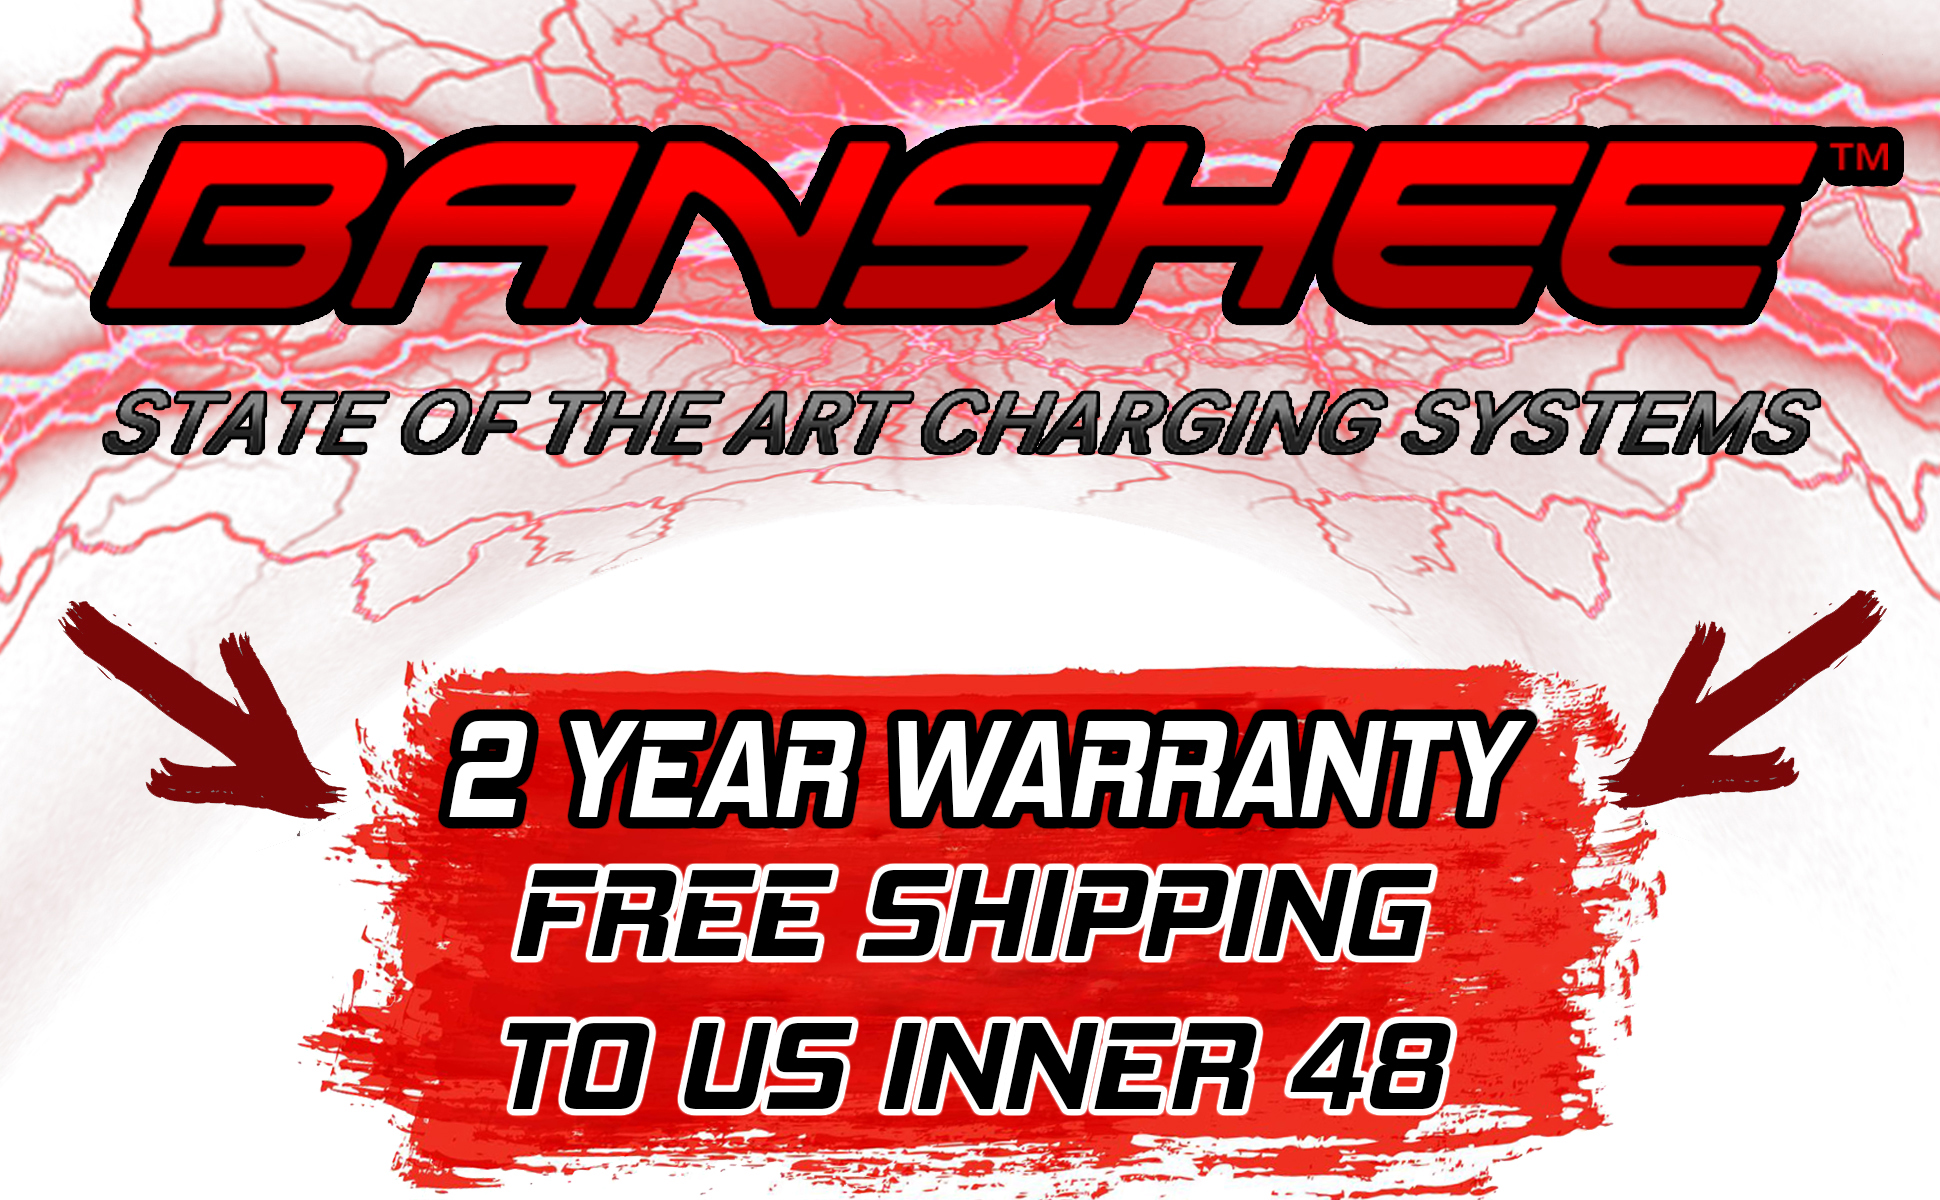 Banshee 6V12V Battery Charger/Maintainer For Car Boat Lawn Mower Tractor Marine